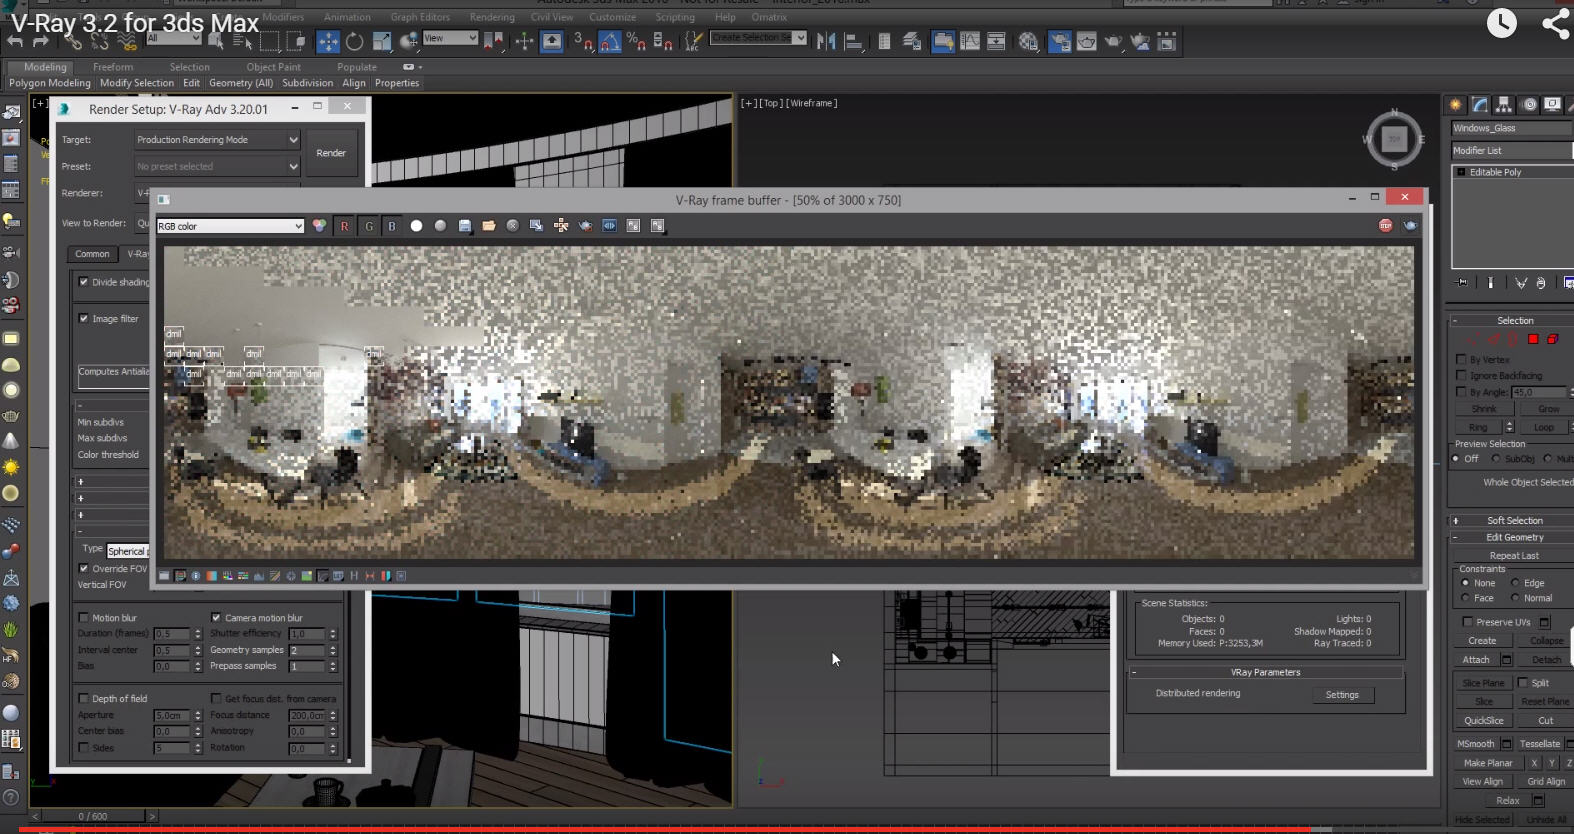 vray 3.30.06 for 3ds max 2016 free p30download